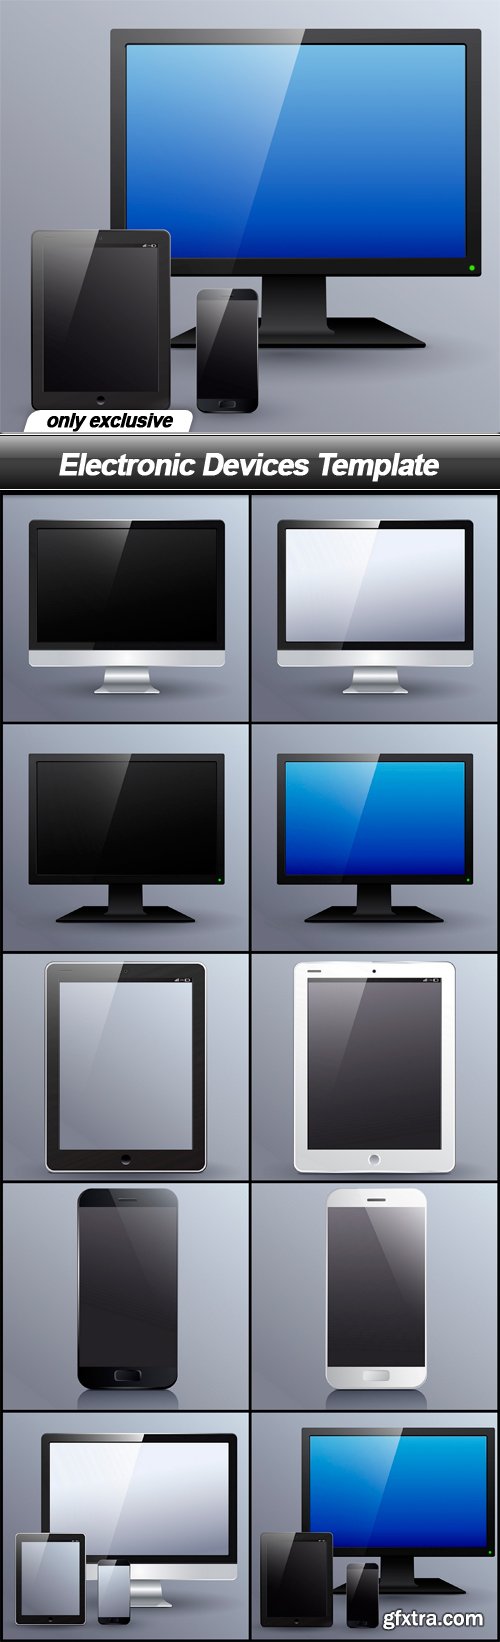 Electronic Devices Template - 10 EPS